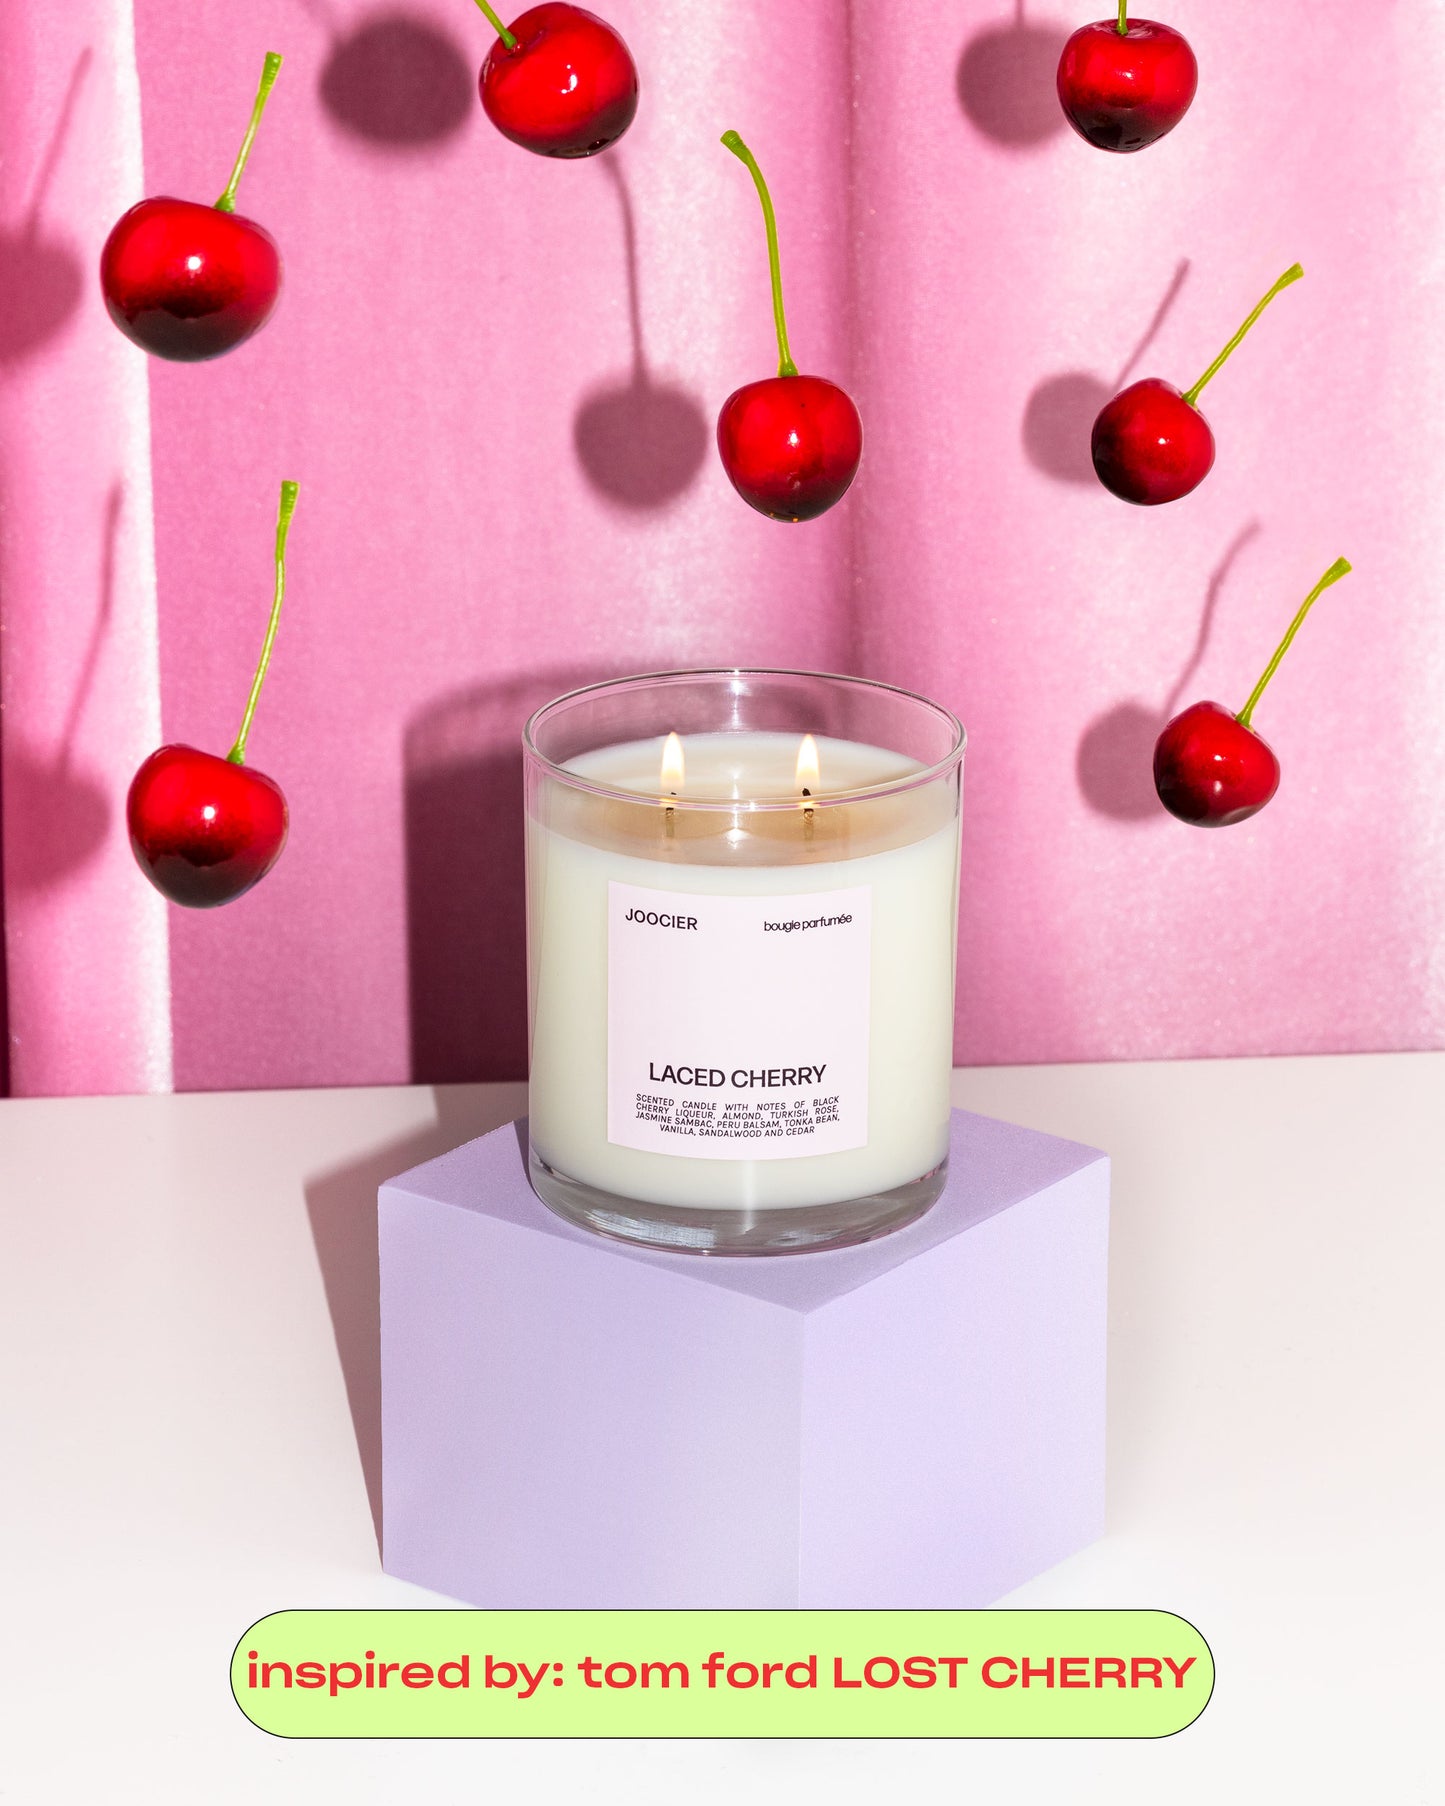 Tom Ford Lost Cherry Dupe | Dupe candles | Fragrance dupes | Tom Ford Dupe | Cherry candle made by Joocier, a woman owned candle brand. Hand poured coconut soy wax candles.